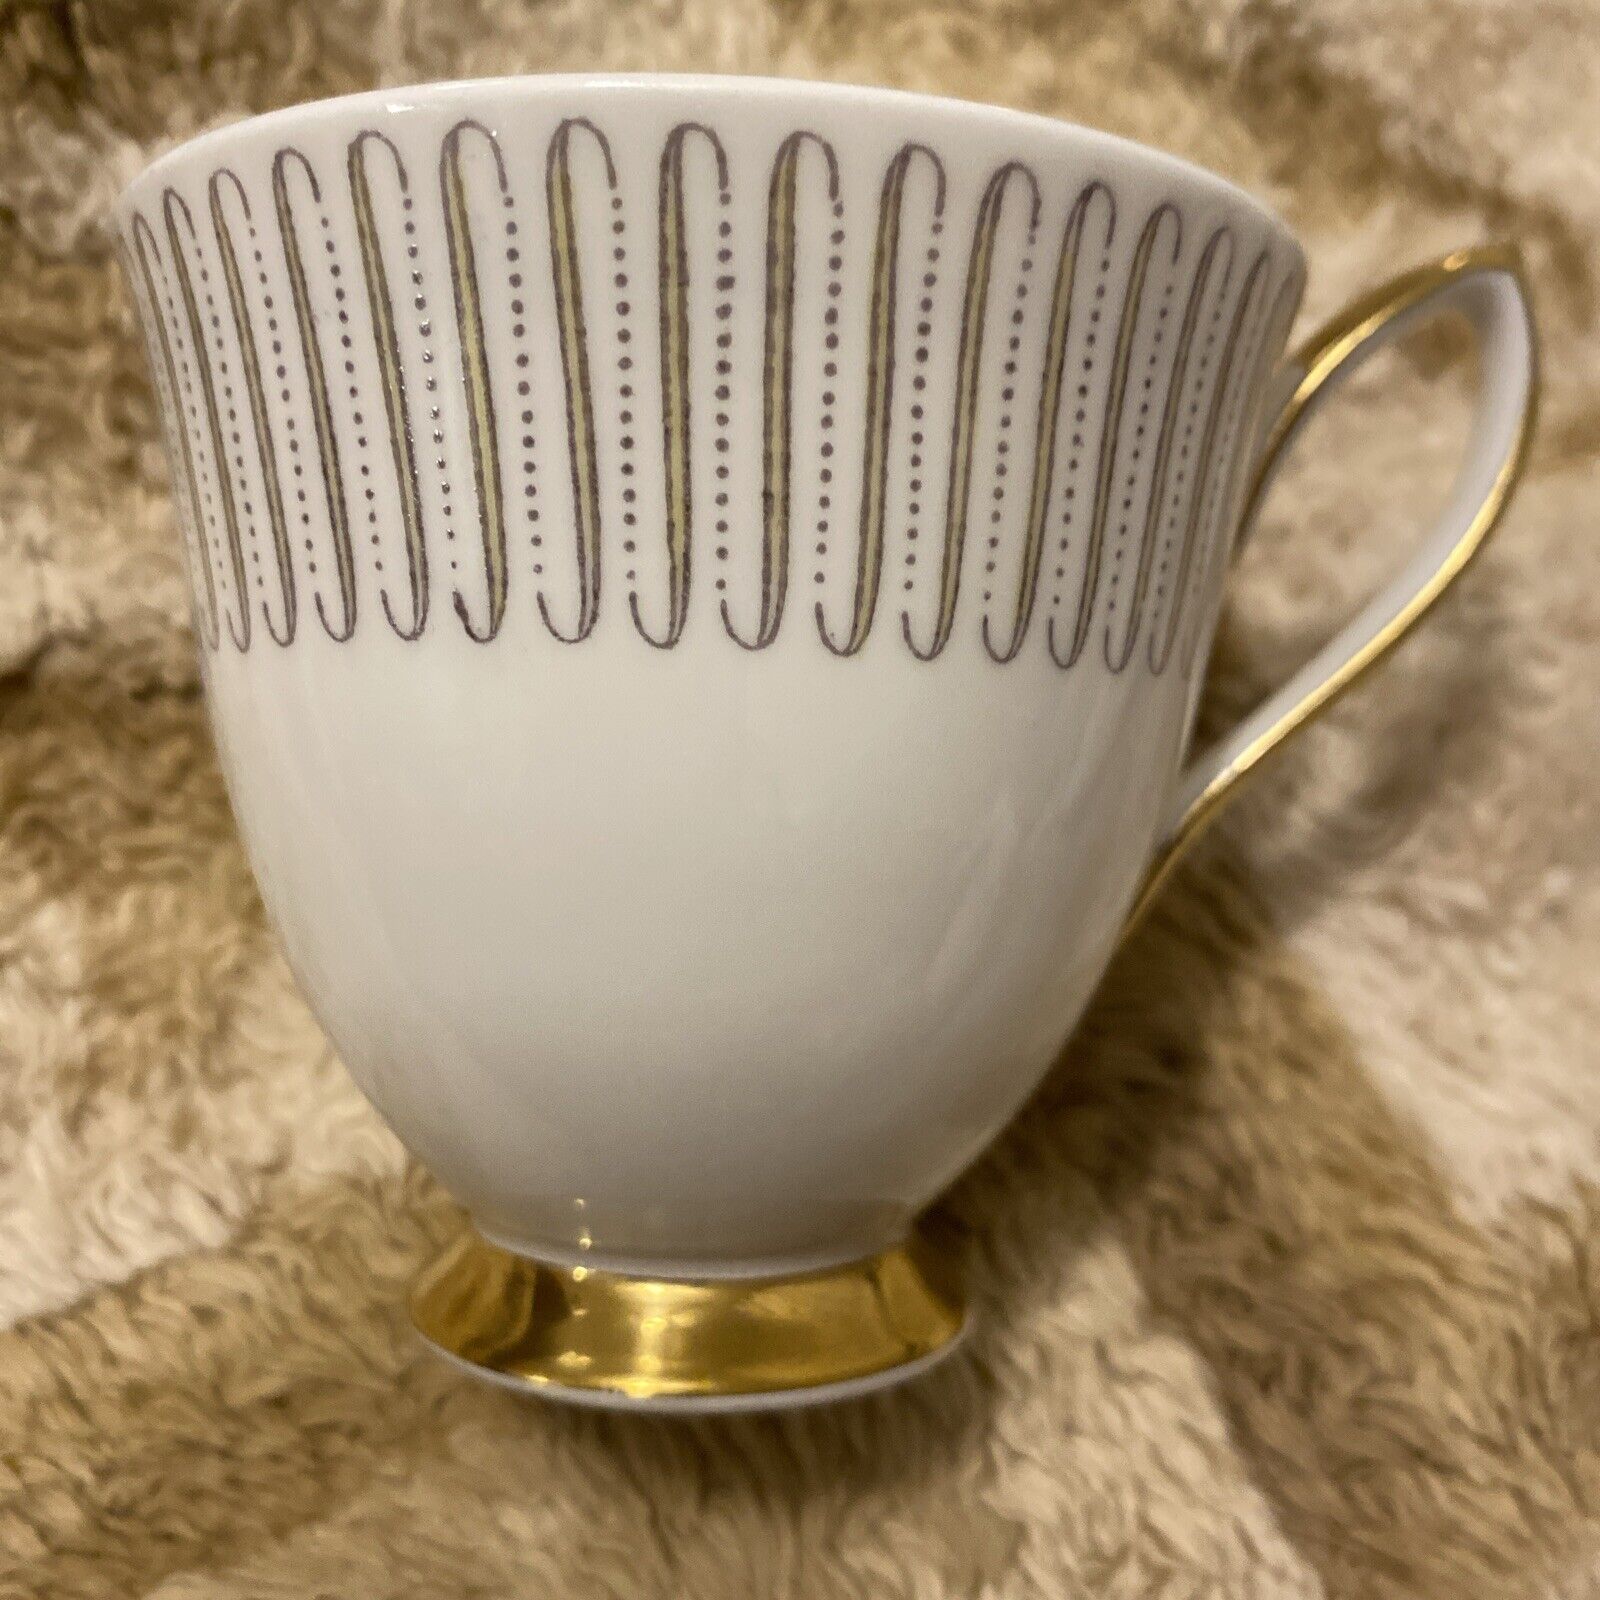 Vintage Royal Albert “Capri” Footed Cup Bone China England. White and Gold.